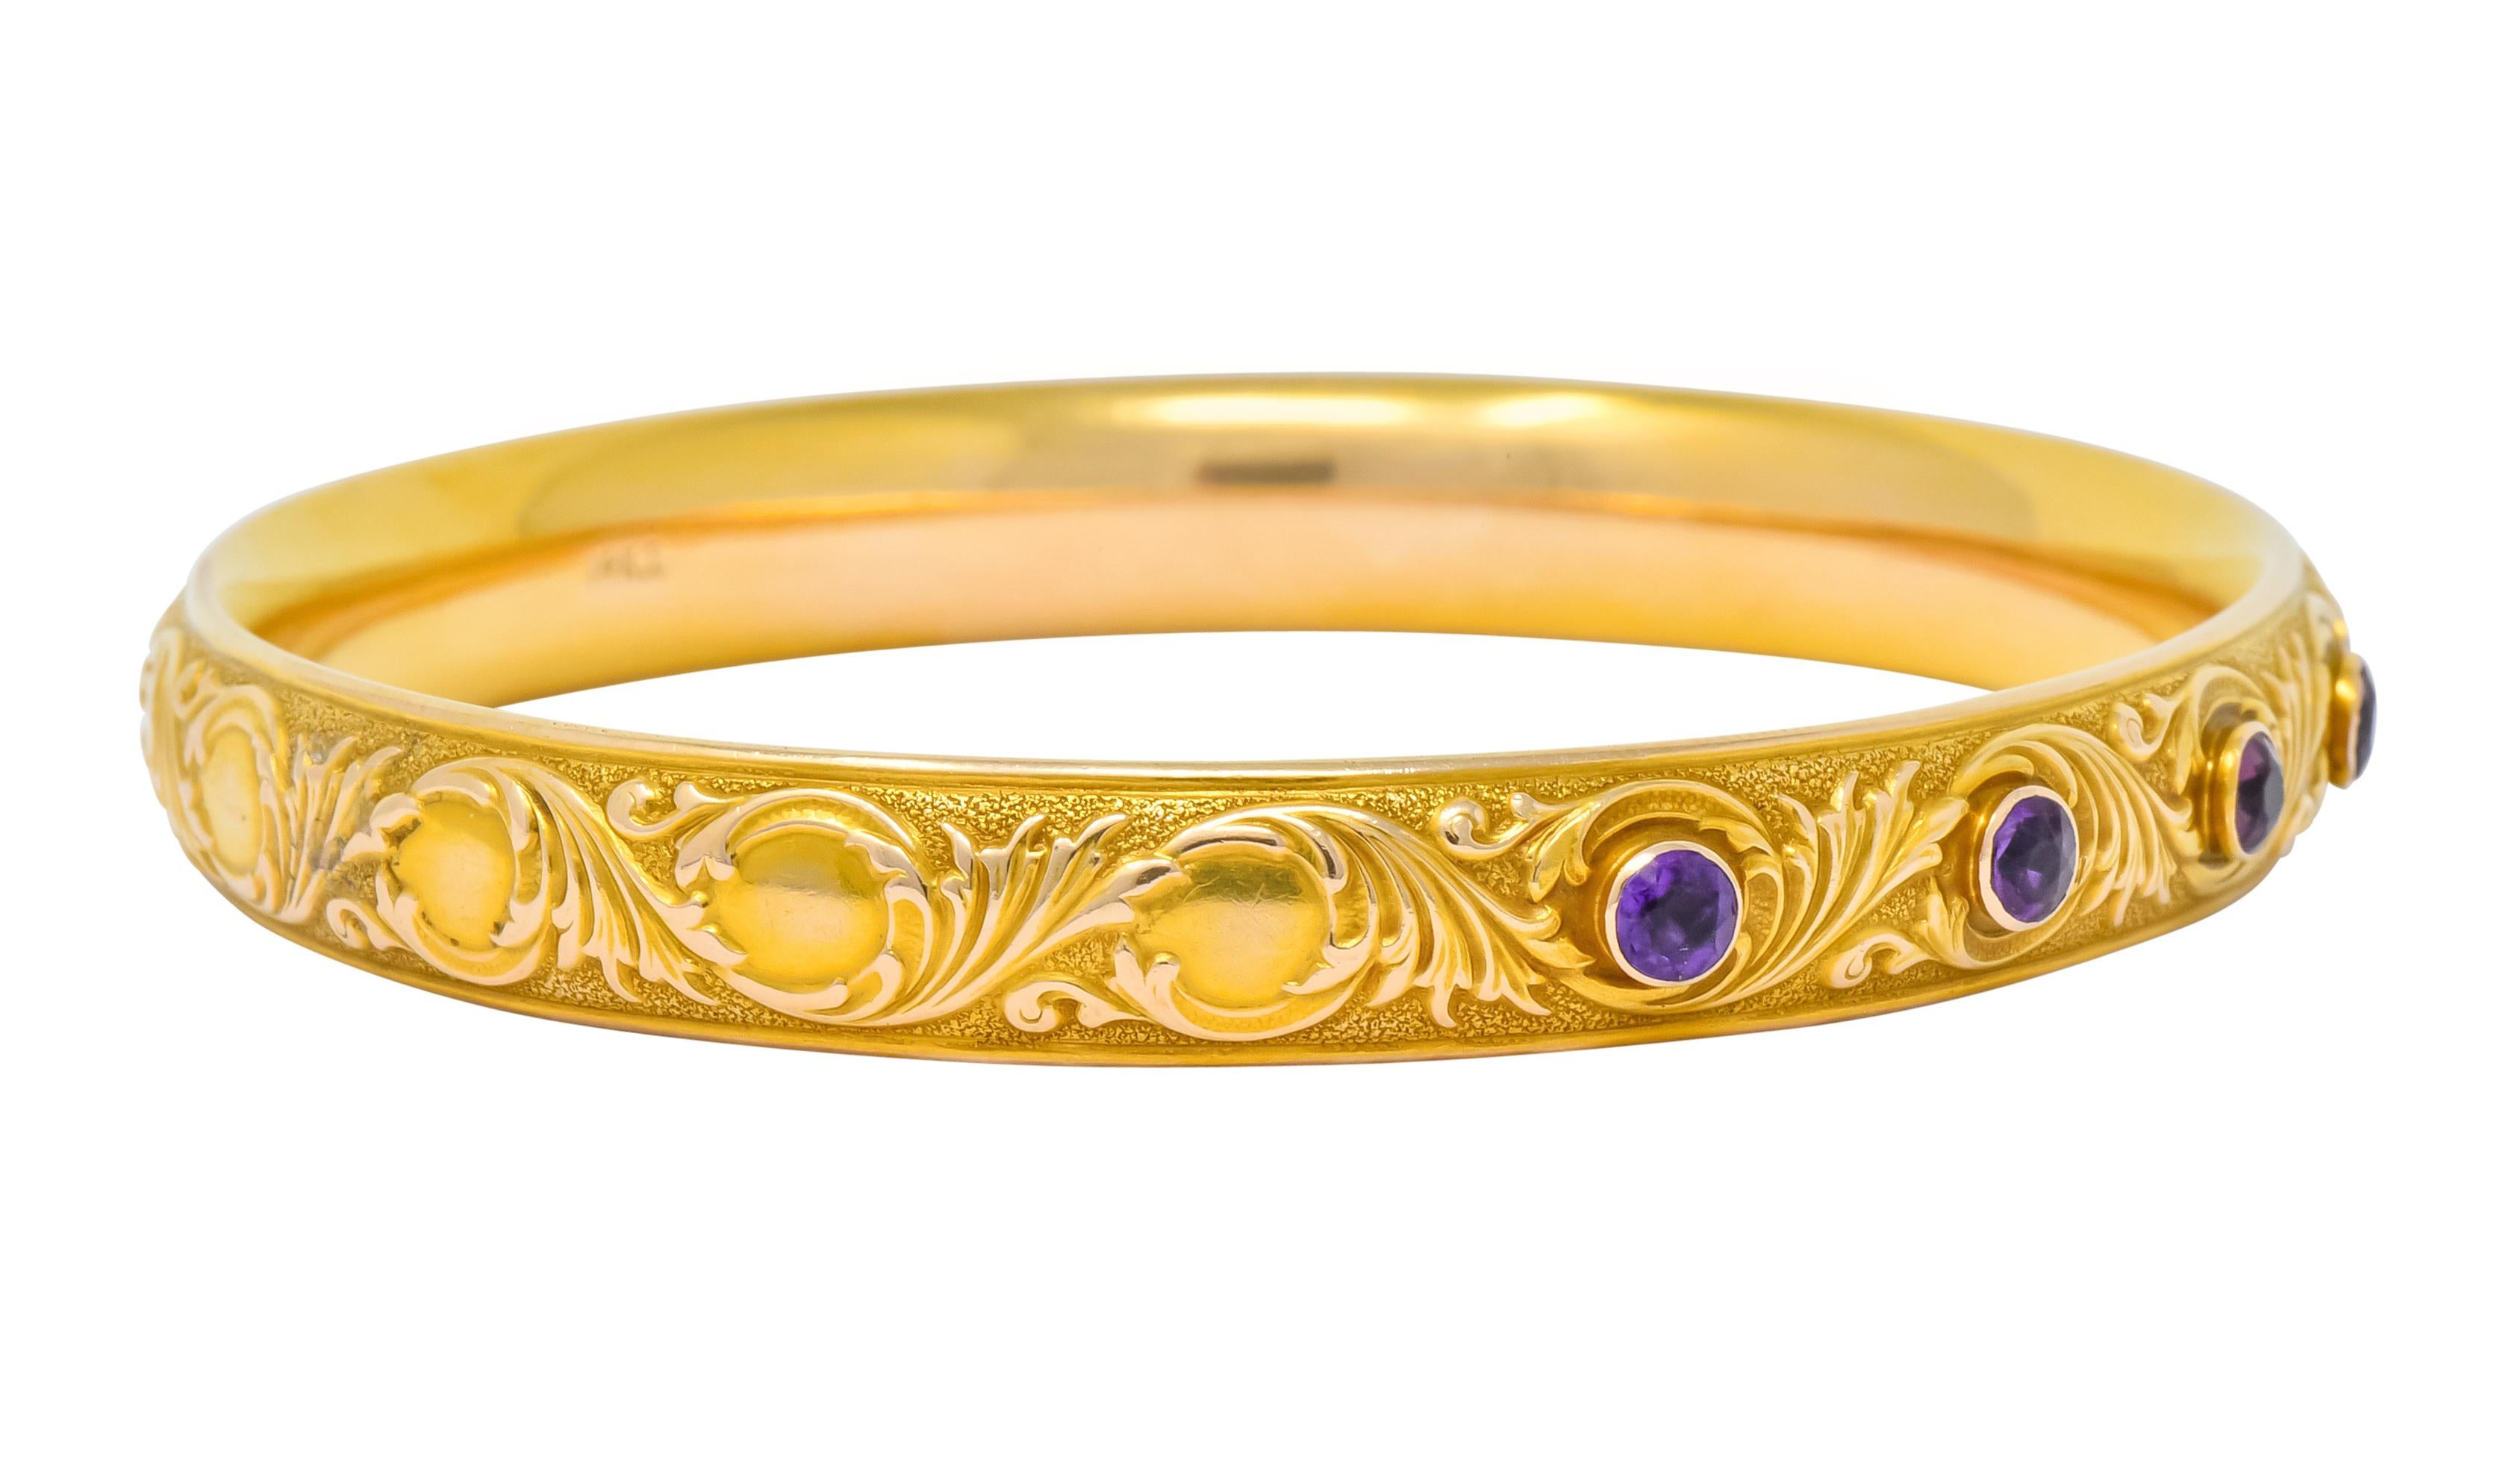 Bangle style bracelet deeply engraved throughout with scrolling, foliate, whiplash motif and finished with a stippled texture

Bezel set to front with seven round cut amethysts, transparent and a vibrant orchid purple in color

With maker's mark for